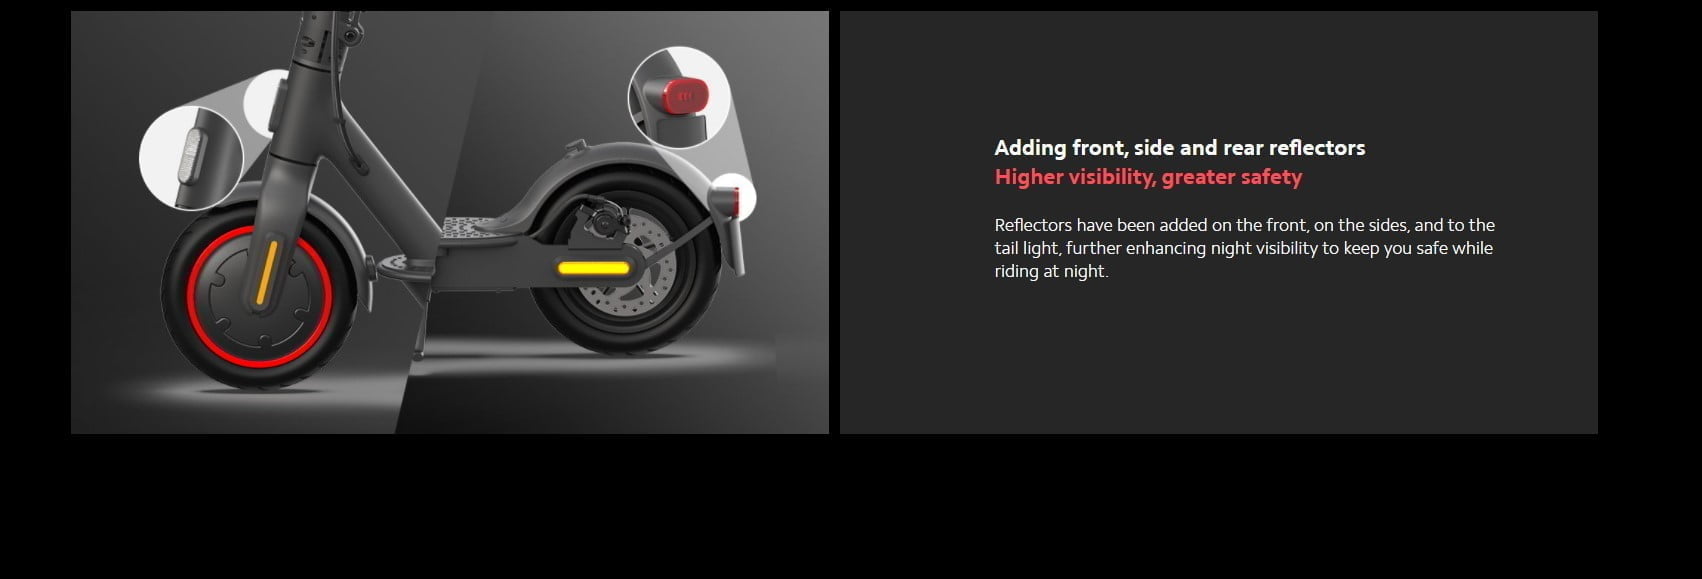 Screenshot 2021 02 27 190527 Xiaomi &Lt;H1&Gt;Mi Electric Scooterpro 2&Lt;/H1&Gt; &Lt;H2&Gt;Ride With Power, Go The Distance&Lt;/H2&Gt; &Lt;P Class=&Quot;Title&Quot;&Gt;Performance Upgrades That Will Take You Further: The Perfect Combination Of Practicality And Beauty, Taking You To Further Places.&Lt;/P&Gt; 600W Powerful Motor Performance Enjoy The Speed &Lt;P Class=&Quot;Title&Quot;&Gt;Three-Speed Modes, Easy Switch: When Commuting To Work, Press S To Go Faster. When Cruising Around The Park, Press D, And In Crowded Areas, You Can Turn On The Pedestrian Mode To Go Slower. Simply Double Press The Power Button To Switch Between Modes And Easily Adjust The Speed To Your Surroundings.&Lt;/P&Gt; High Safety Lithium Battery: 45Km Super Long-Range Battery New Generation Energy Recovery System: Convert Kinetic Energy Into Electrical Energy For Longer Battery Life Central Controls Designed For A Better Riding Experience Easy To Control, Try And You Will Know &Lt;P Class=&Quot;Title&Quot;&Gt;Fold It Up In 3 Seconds&Lt;/P&Gt; Fifth-Generation Bms Smart Battery Management System